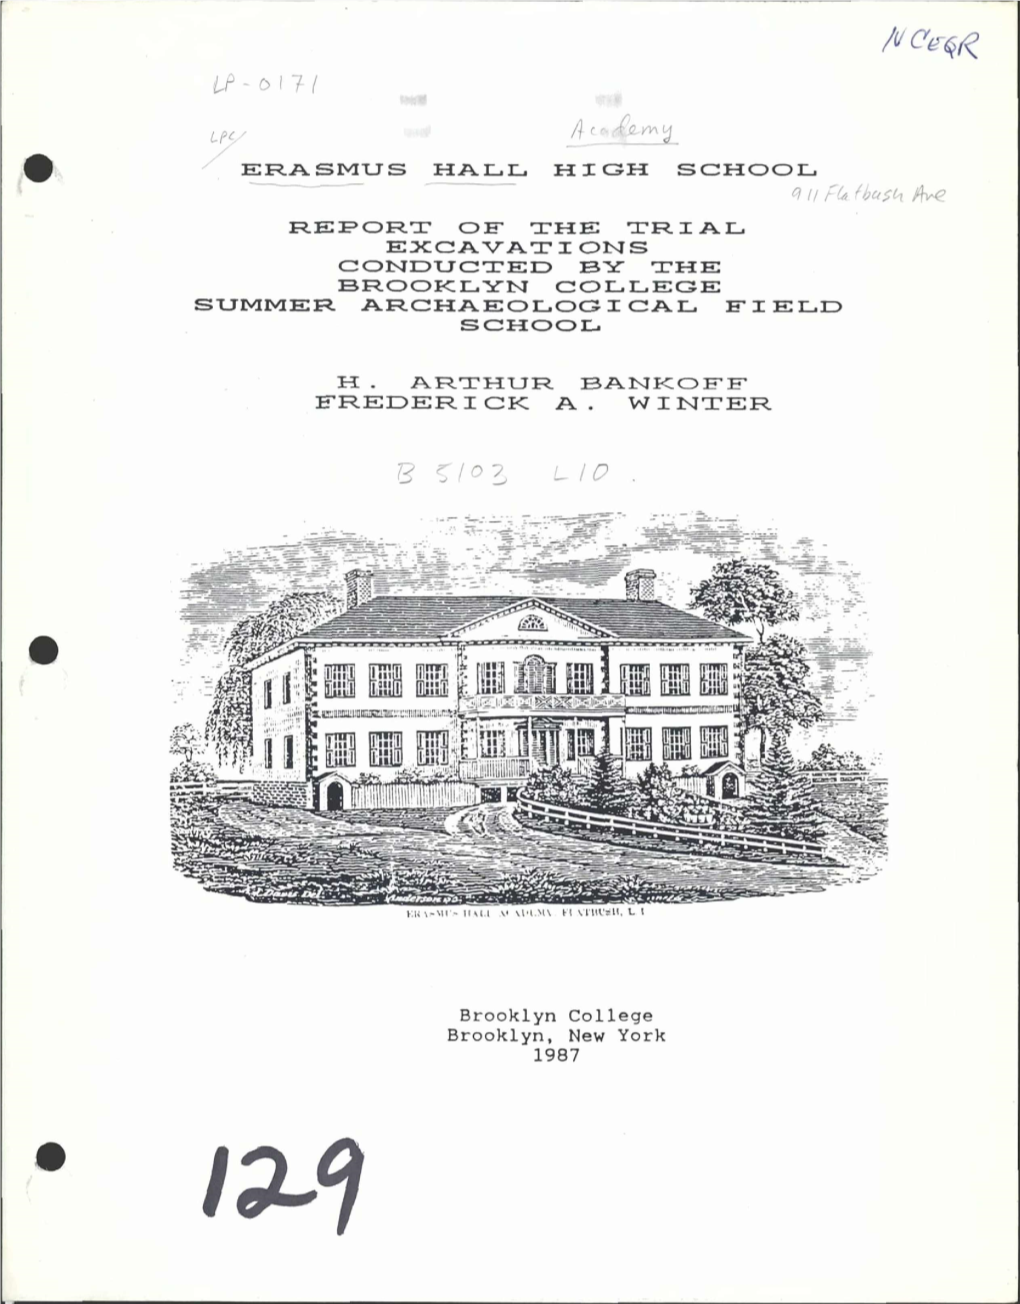 ERASMUS HALL High SCHOOL Q I{ Fc& 11;(($'-1 Jih.Oe REPORT of the TRIAL EXCAVATIONS CONDUCTED by the BROOKLYN COLLEGE SUMMER ARCHAEOLOGICAL FIELD SCHOOL